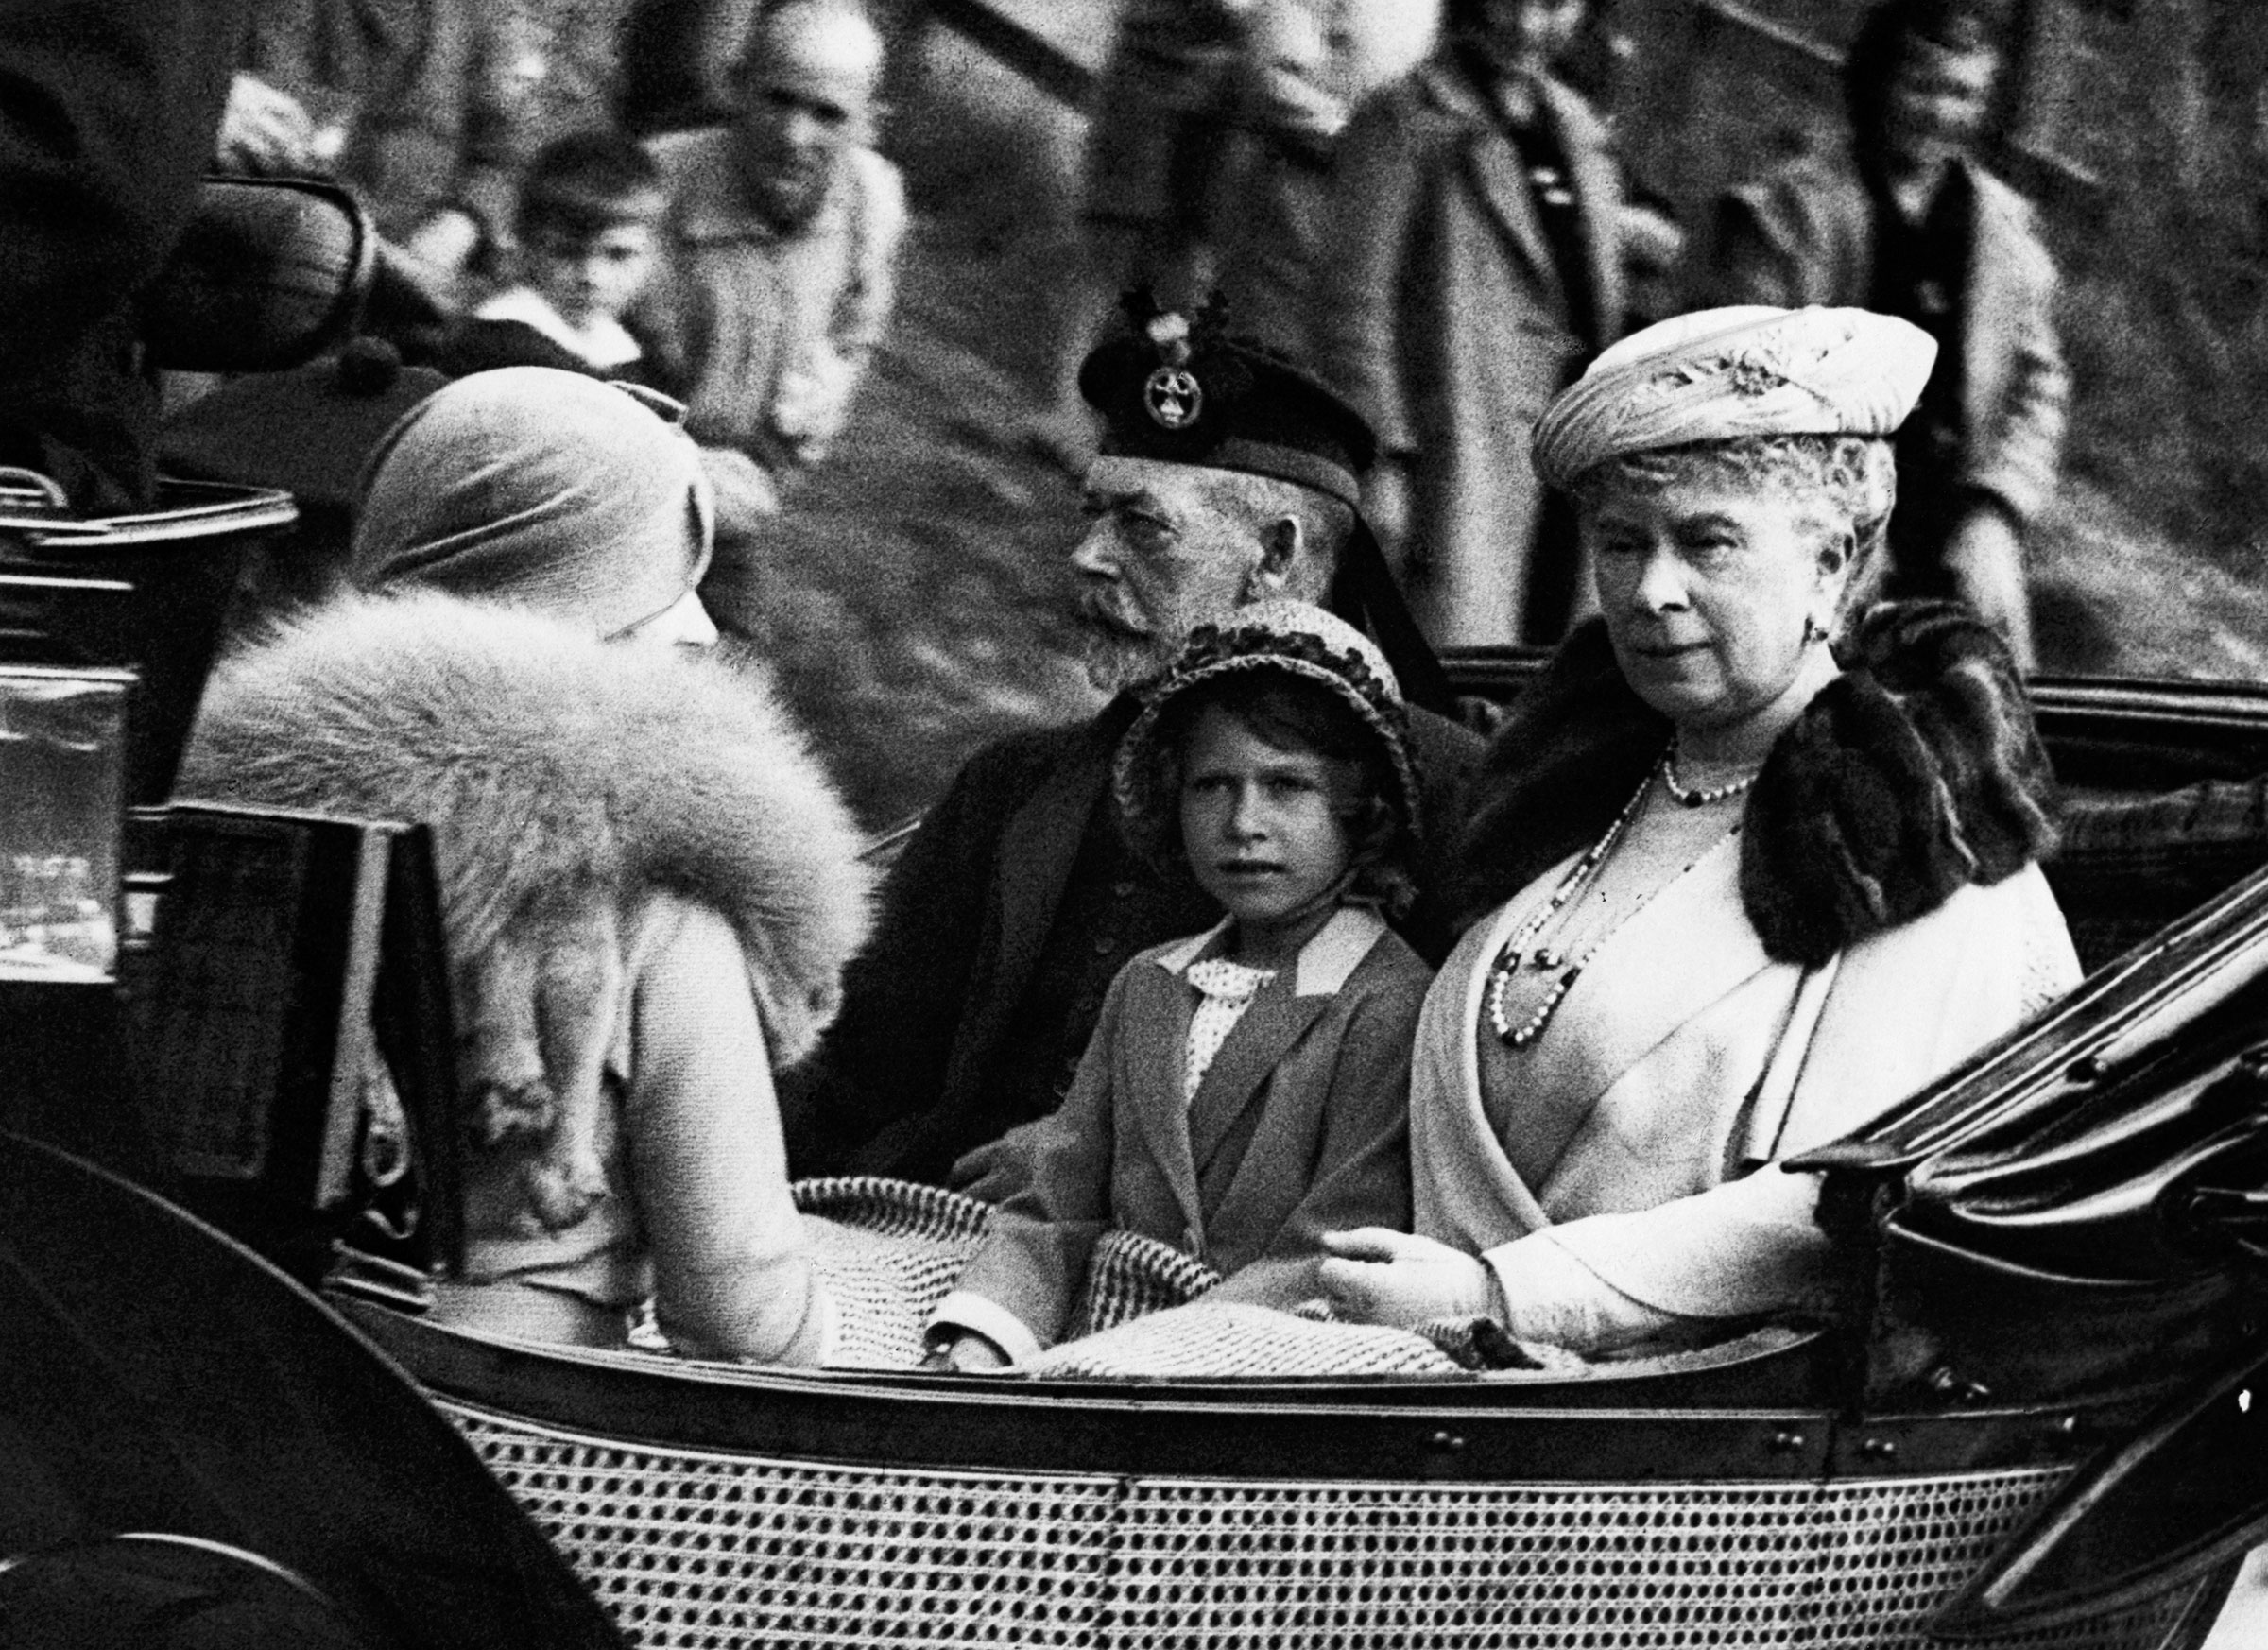 Princess Elizabeth sits between her grandparents, King George V and Queen Mary of England, facing her mother Elizabeth, the Duchess of York, as the Royal Family returns from a service at Crathie Church. (Hulton-Deutsch Collection/Corbis/Getty Images)